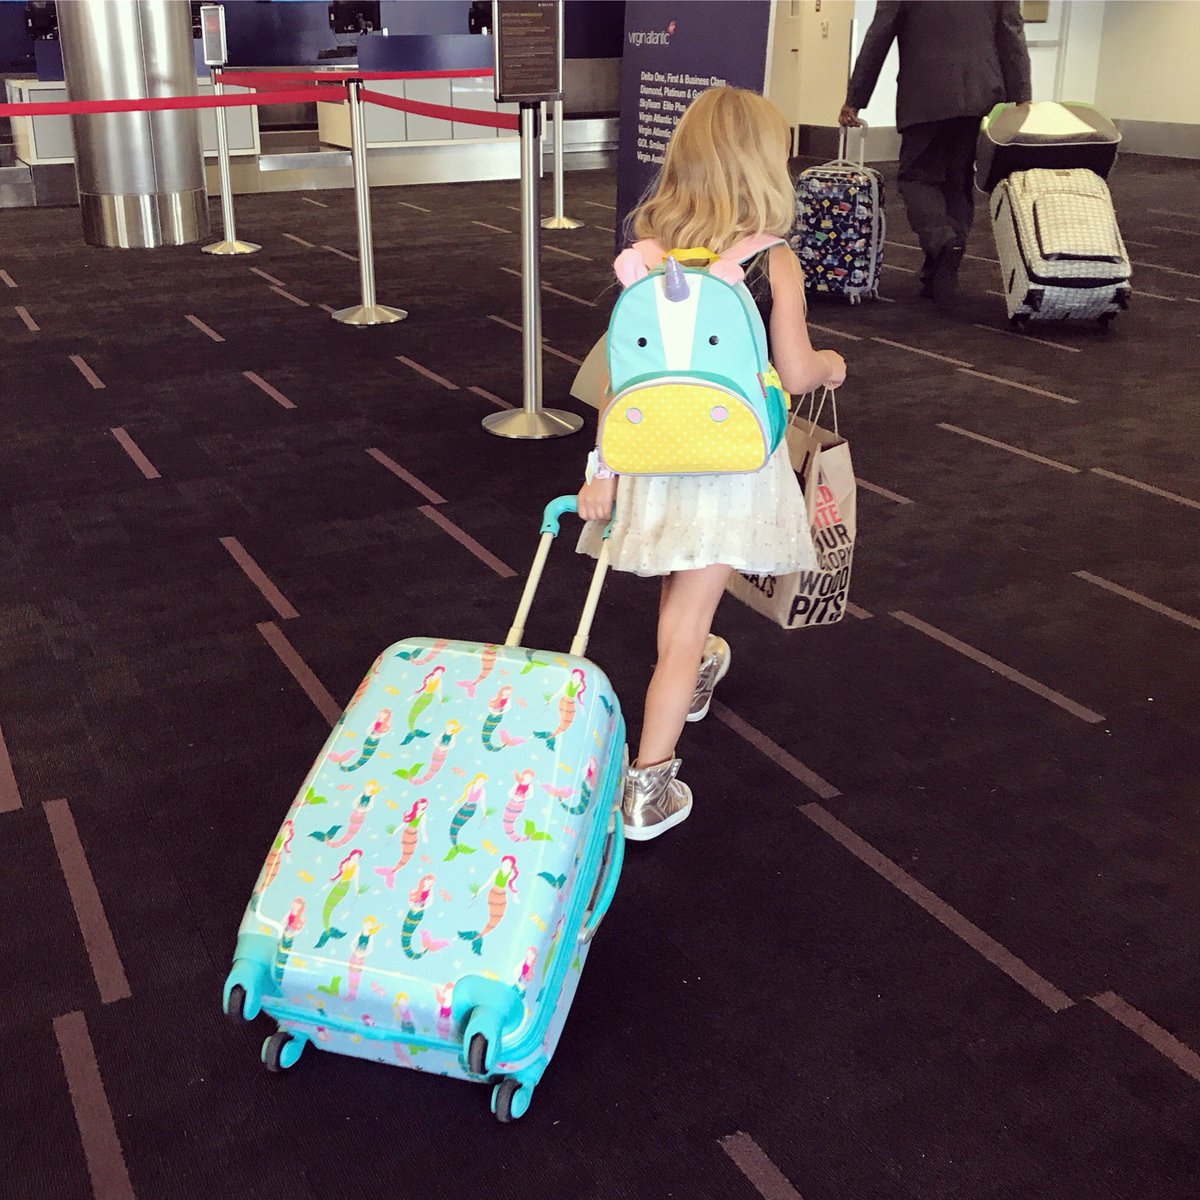 Takin' the lead as always ✈️ #MAXIDREW https://t.co/qyrRgN00aa